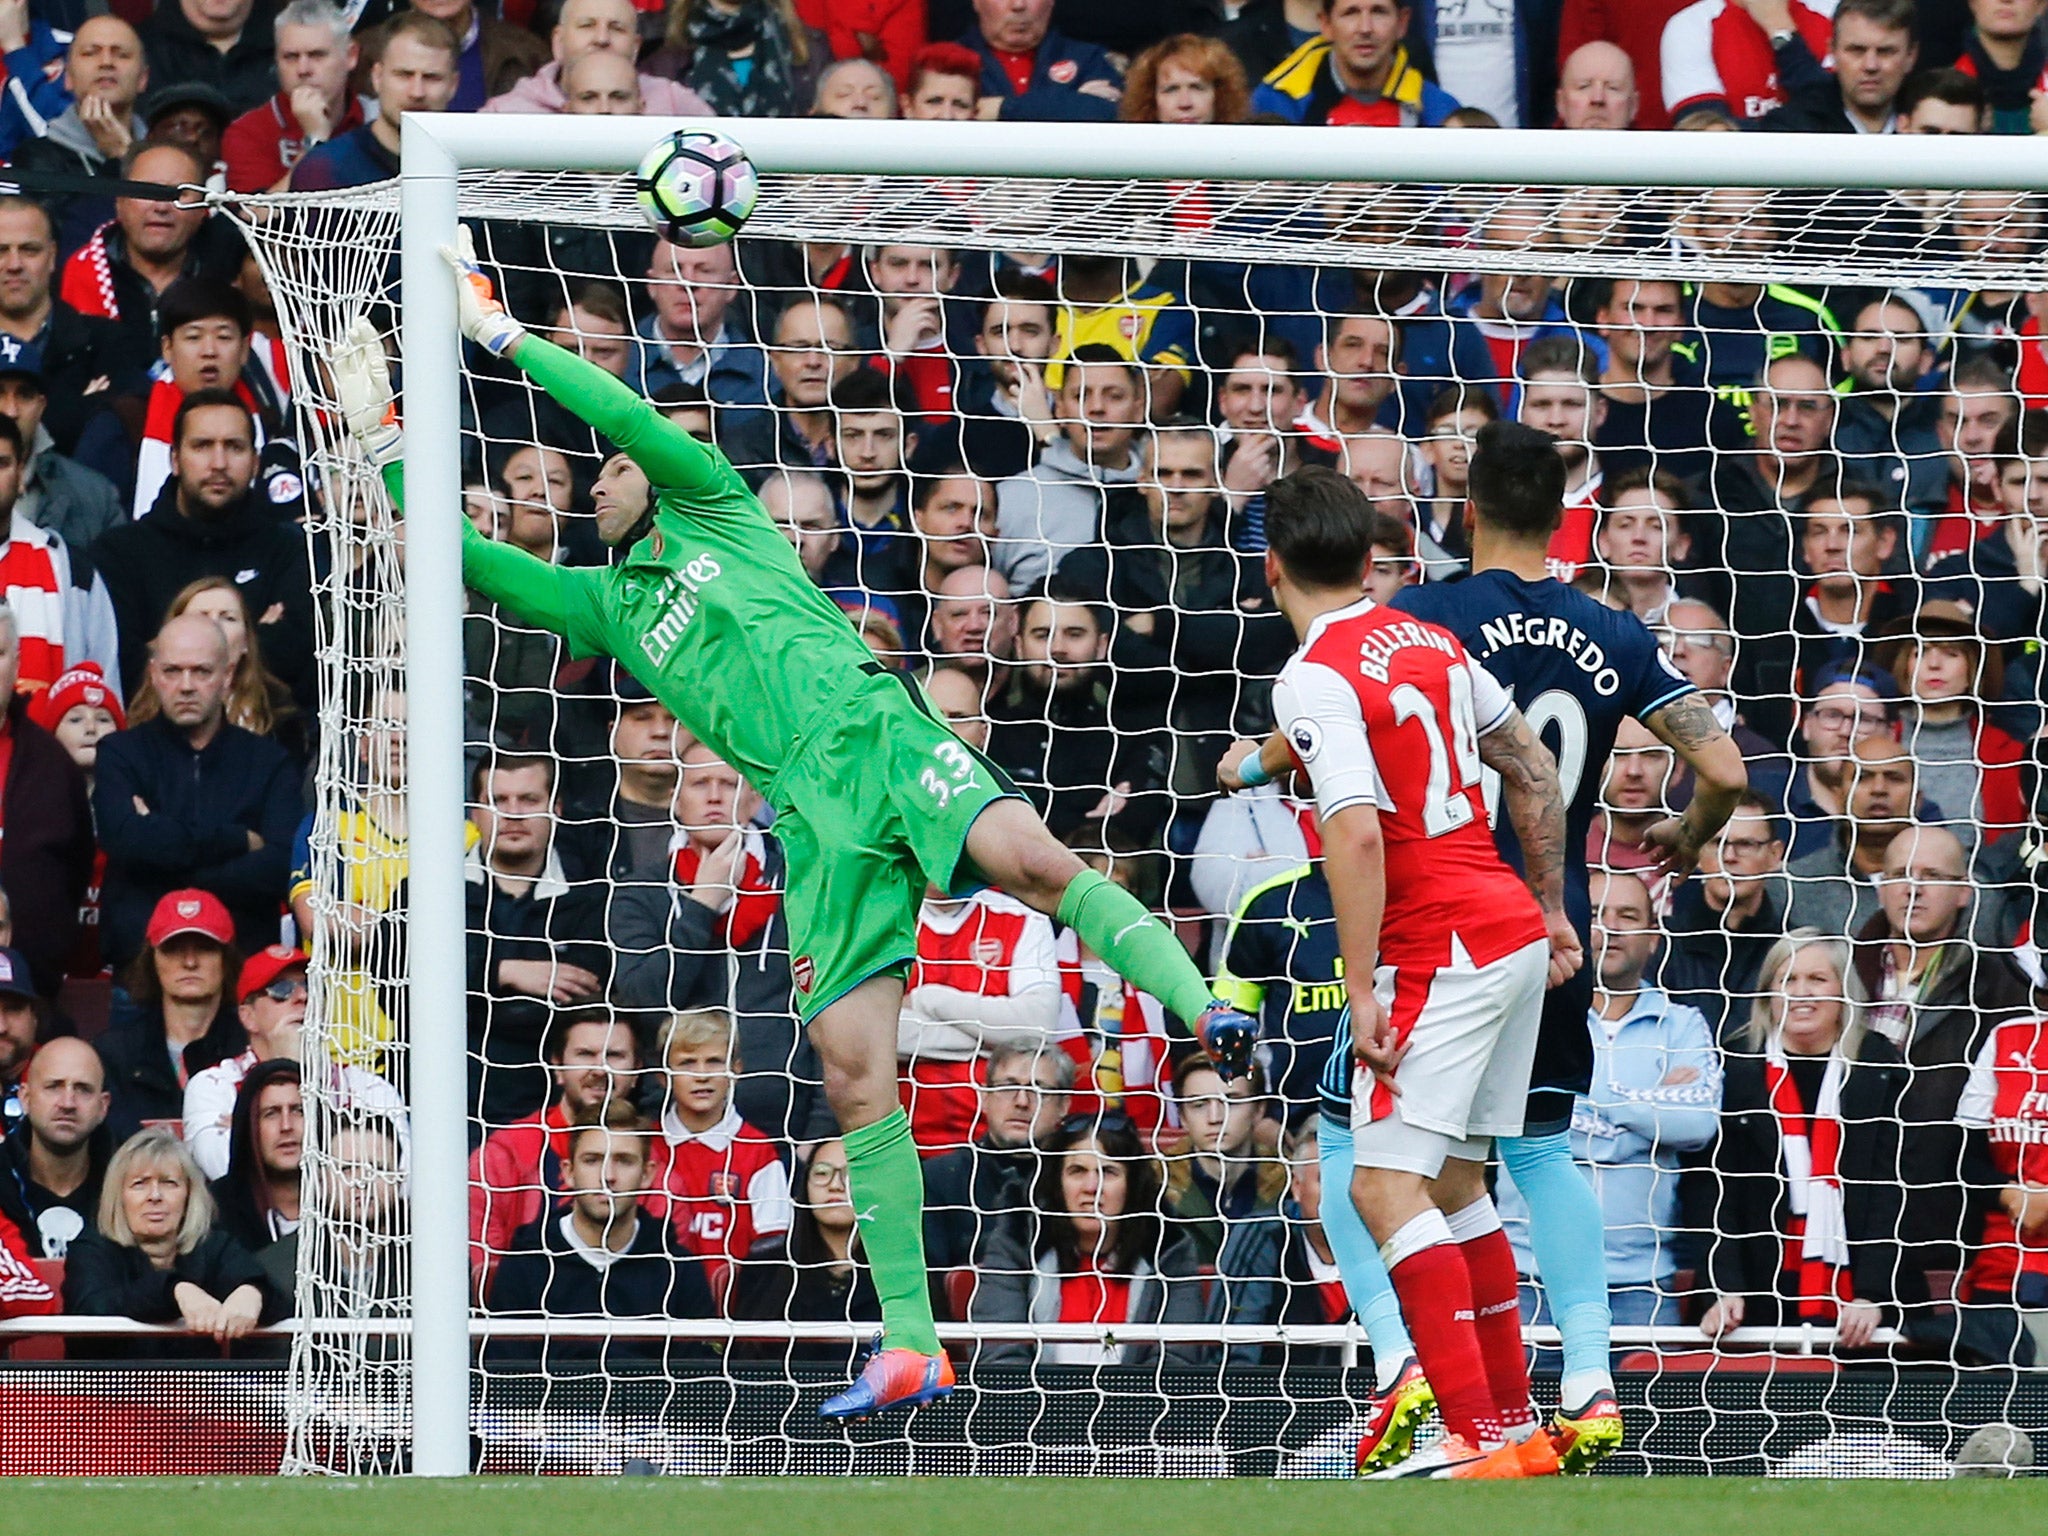 Petr Cech saves from Alvaro Negredo to keep Middlesbrough at bay